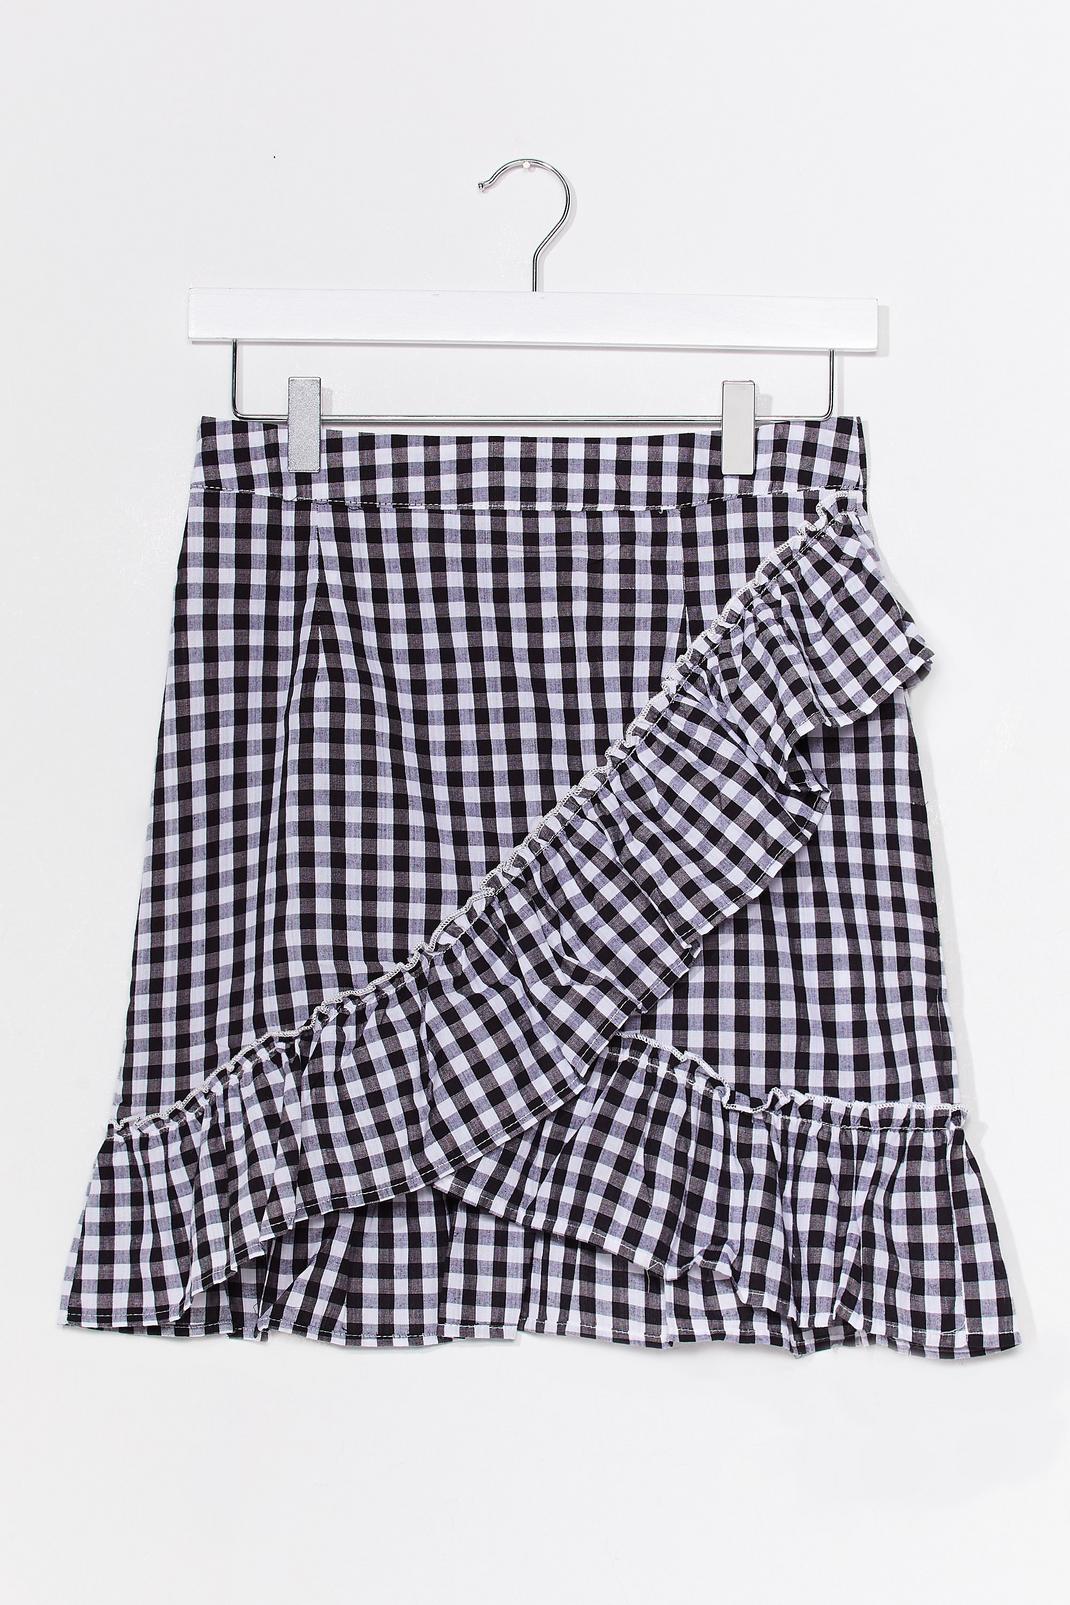 Gingham What They Ask For Ruffle Mini Skirt | Nasty Gal